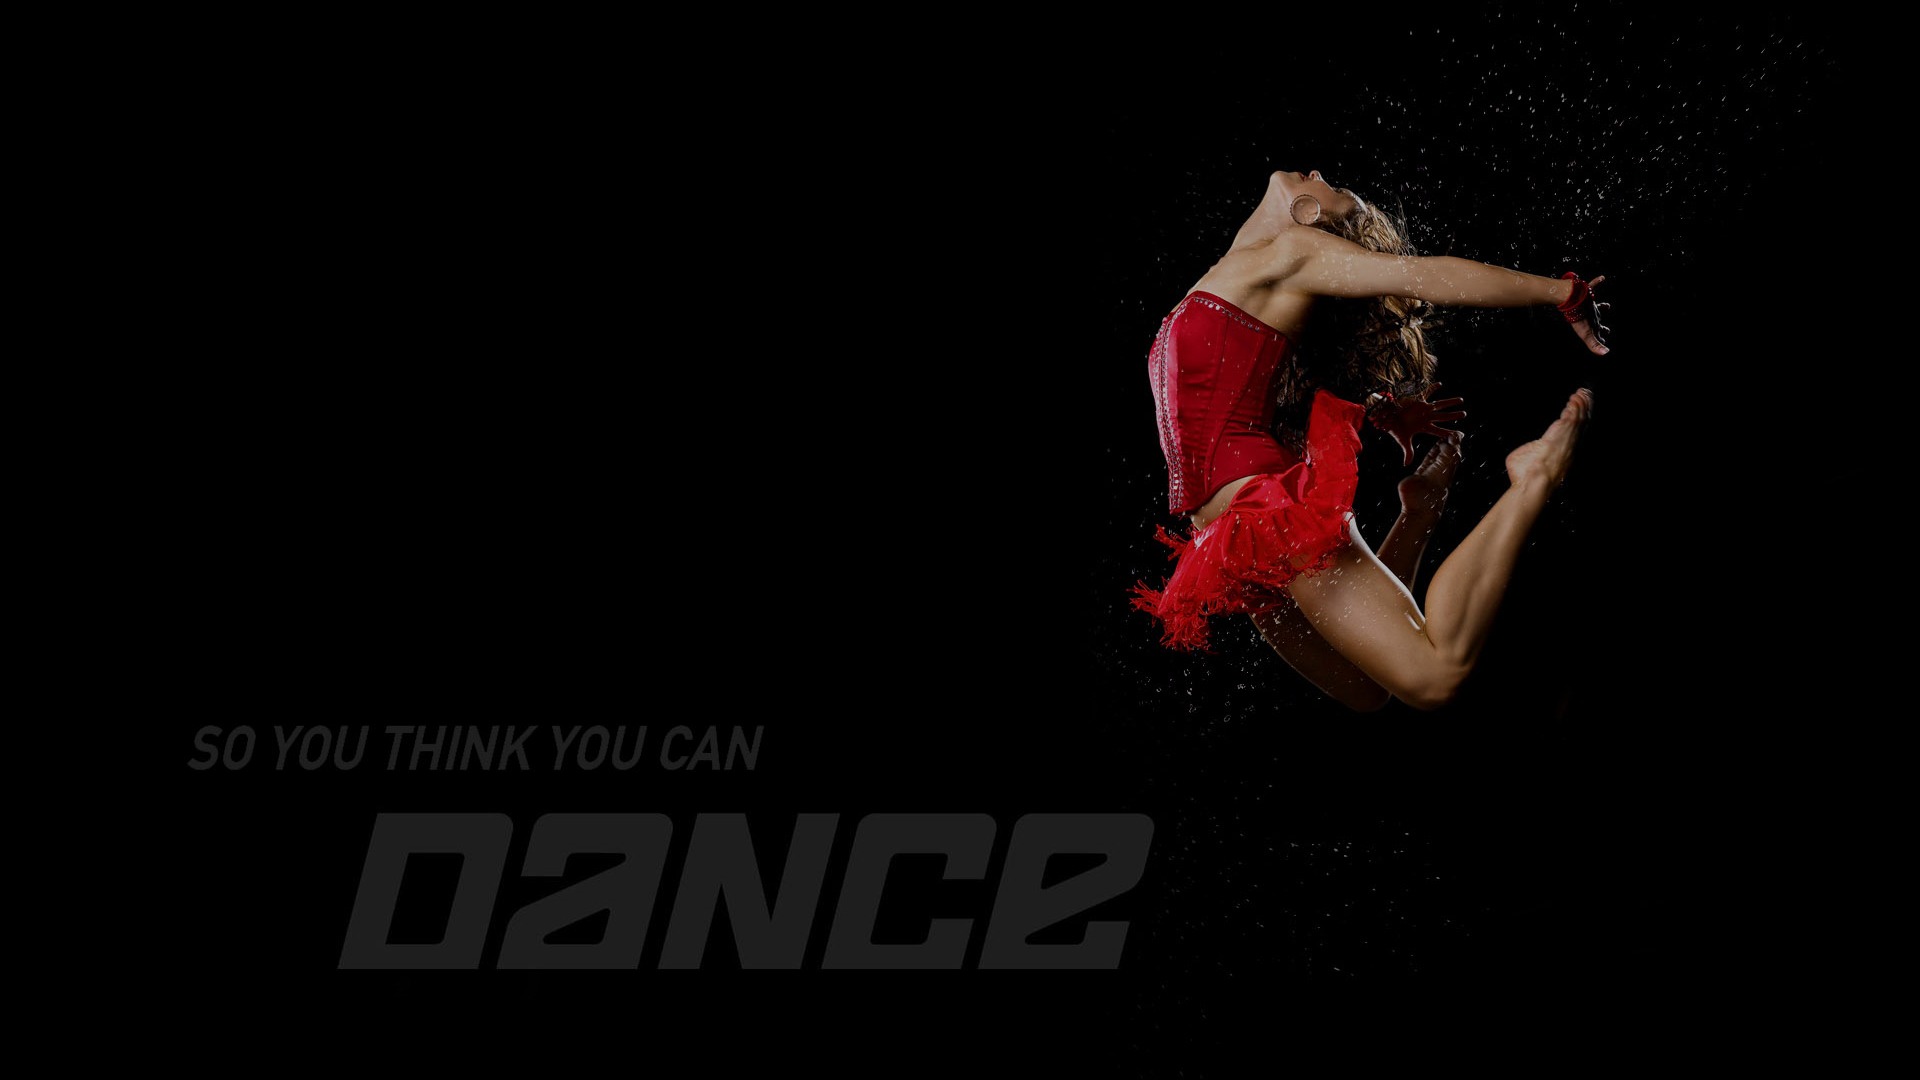 So You Think You Can Dance wallpaper (2) #1 - 1920x1080